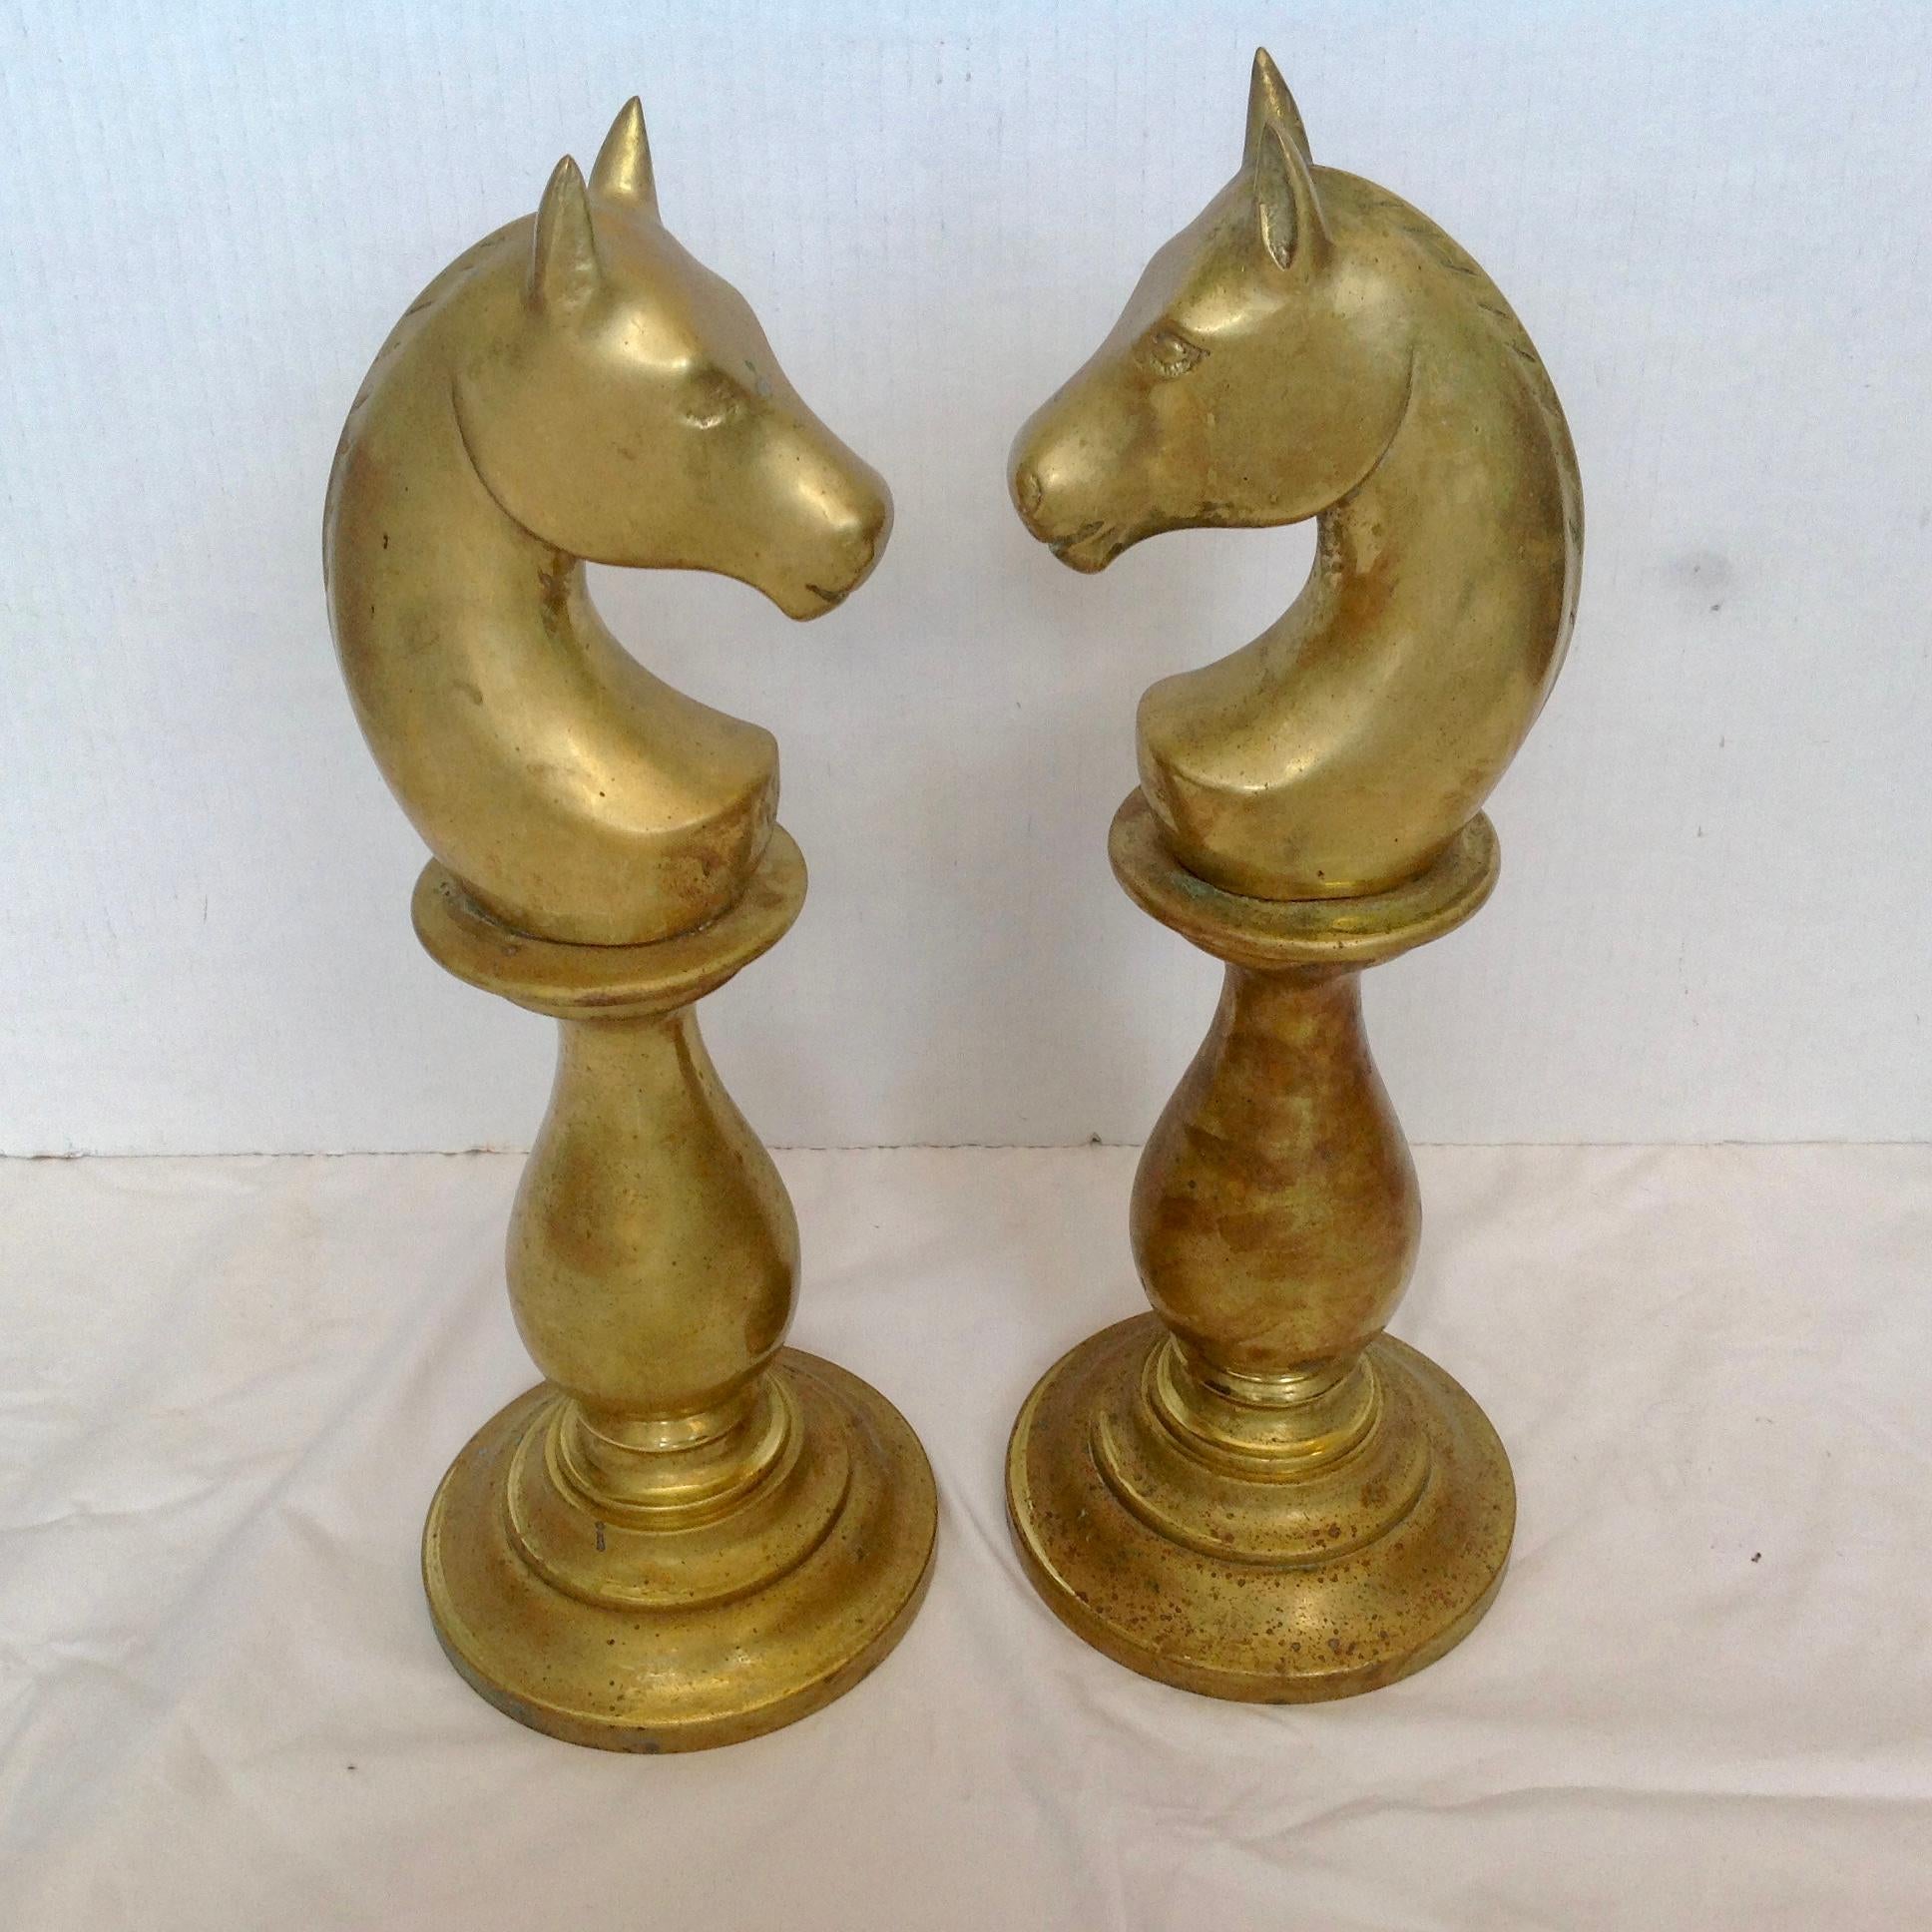 16 1/2 inches tall solid brass - elegantly fashioned and heavy weight.
An outstanding vintage pair.